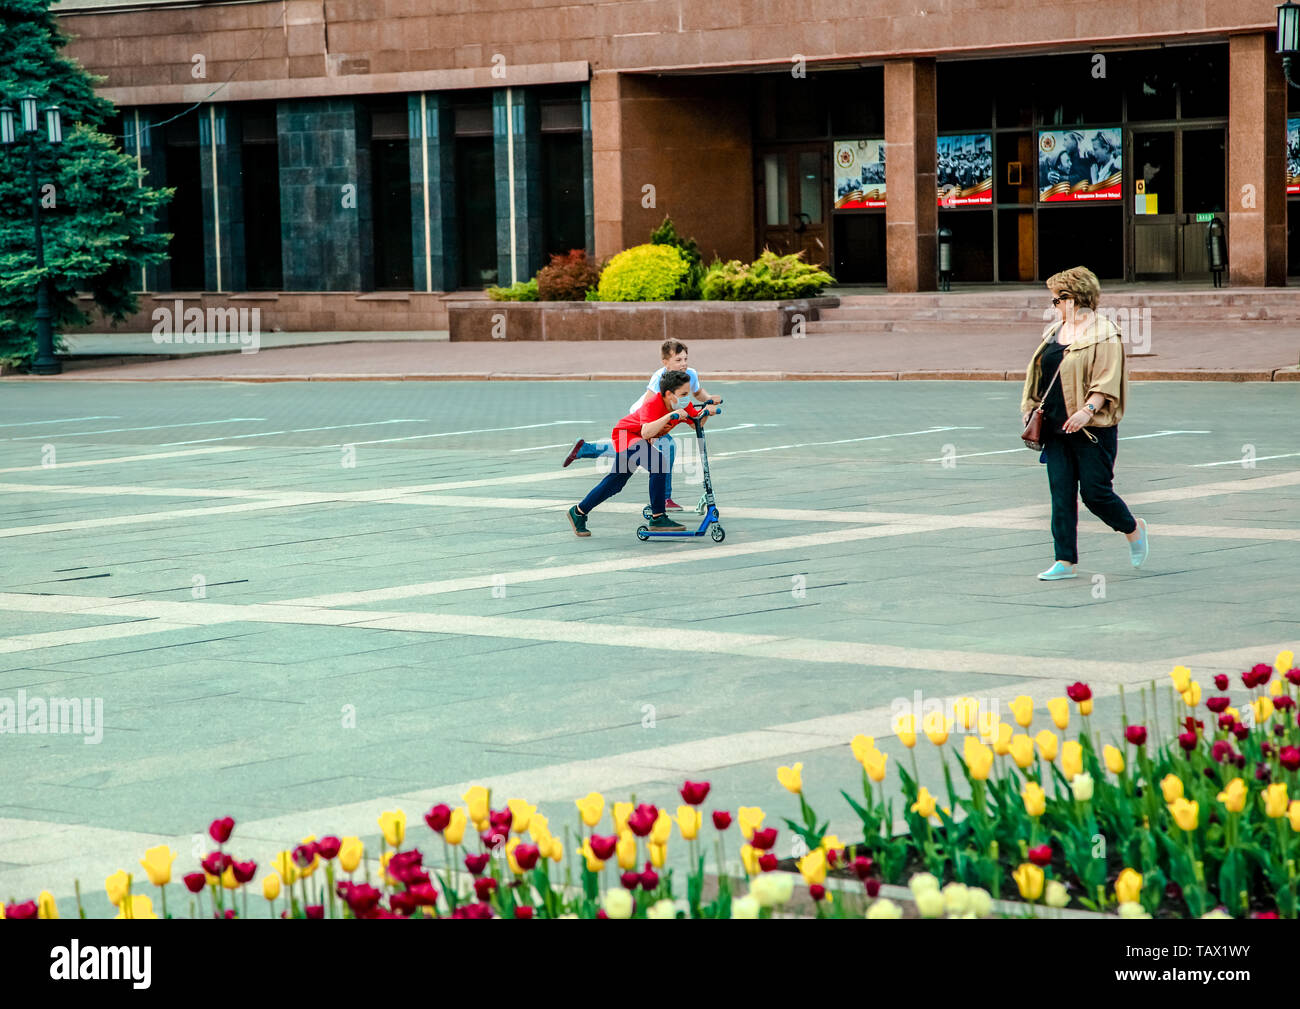 05 14 2019 Russia, Bryansk. Teenagers compete in speed on scooters in the city square. Stock Photo